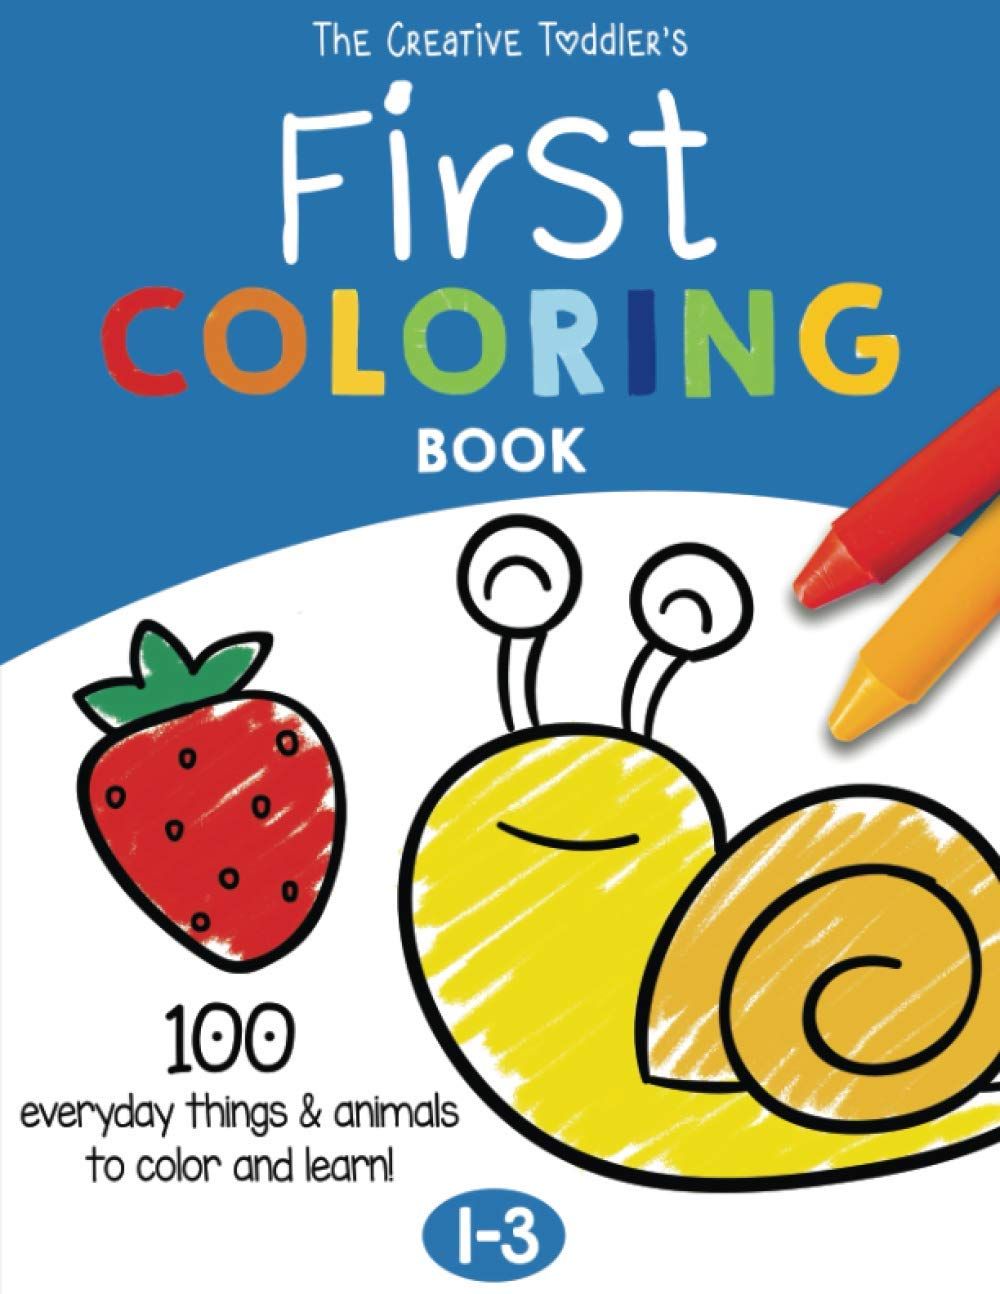 Cover of the creative toddlers first coloring book with an image of a colorful snail and strawberry